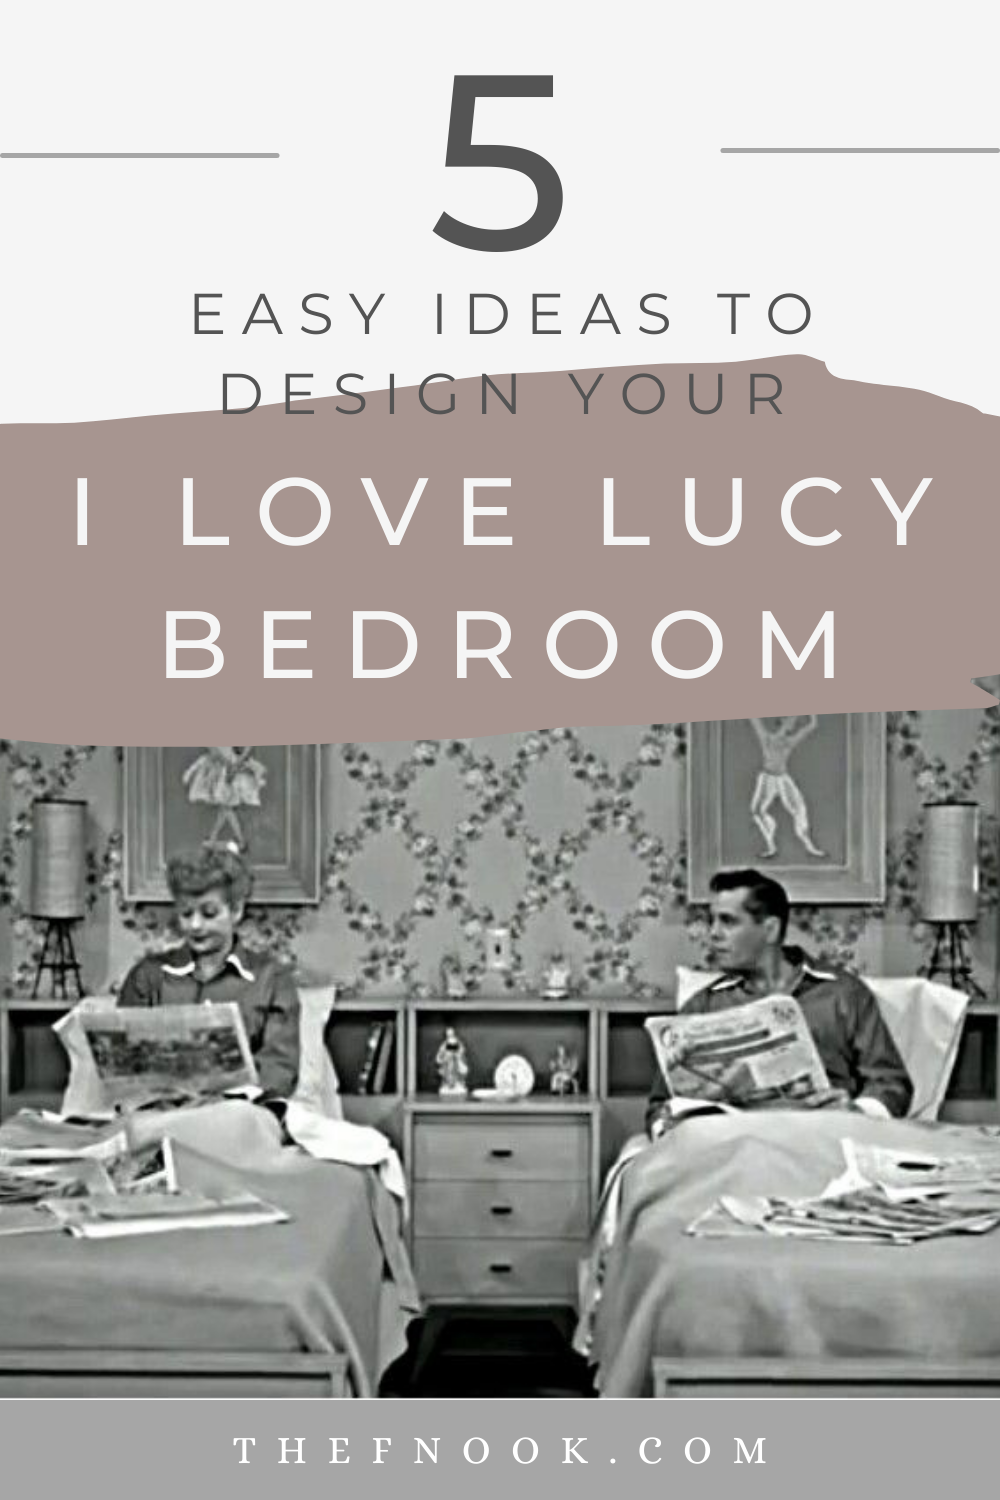 5 Easy Ideas to Design your Bedroom like I Love Lucy